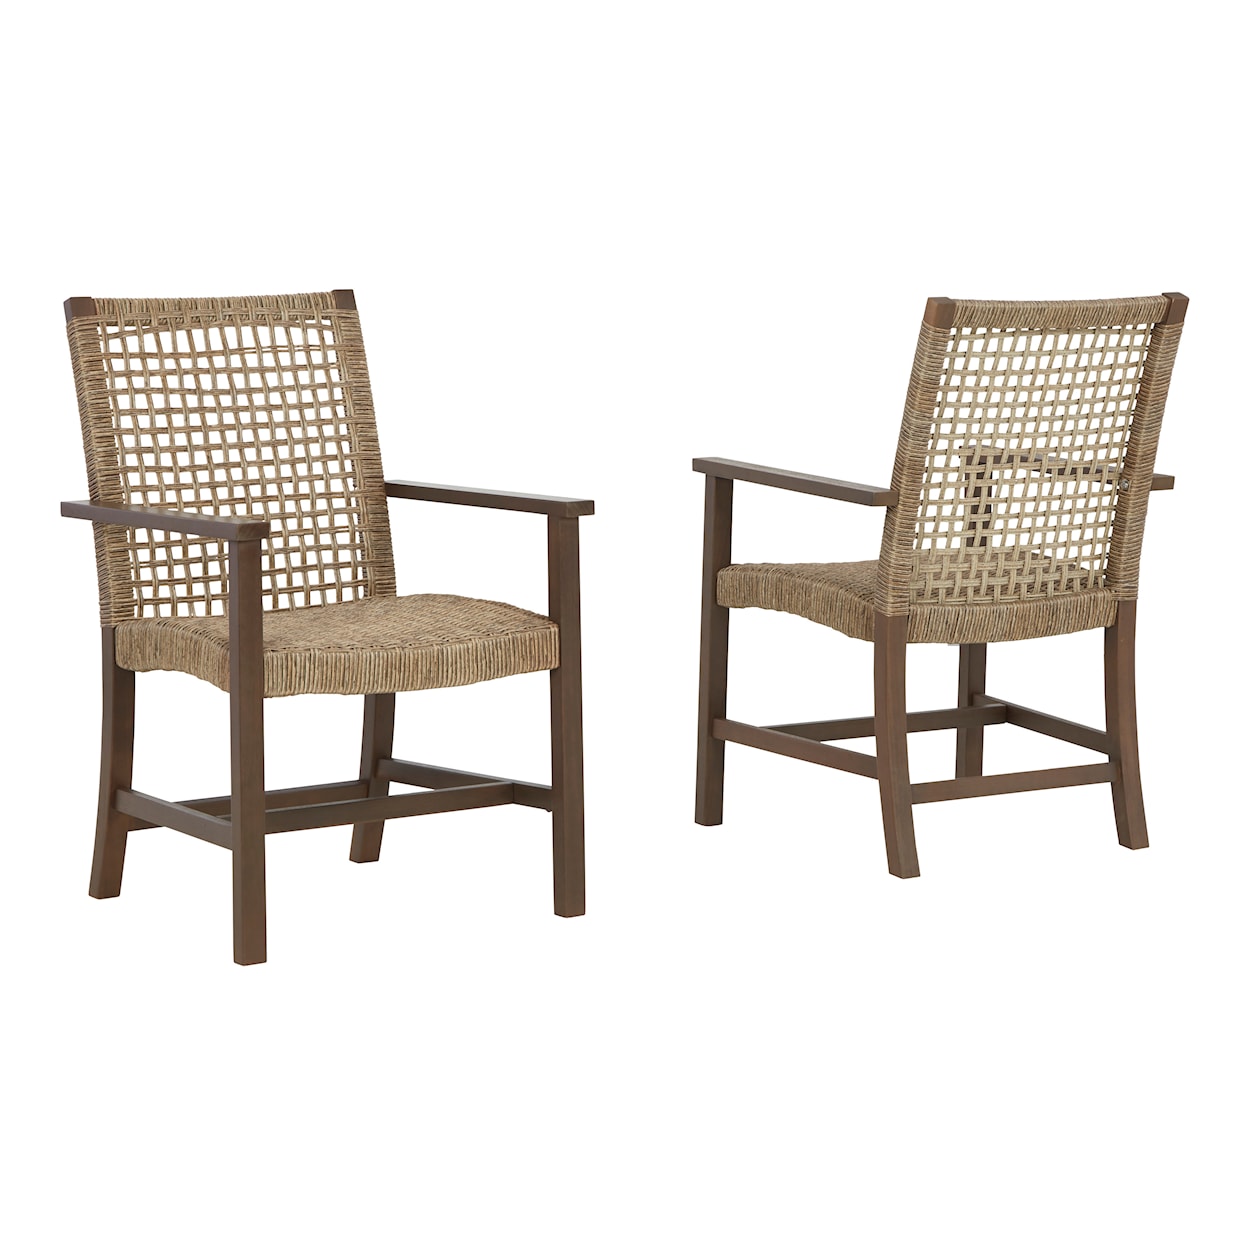 Signature Design Germalia Resin Wicker/Wood Outdoor Dining Arm Chair